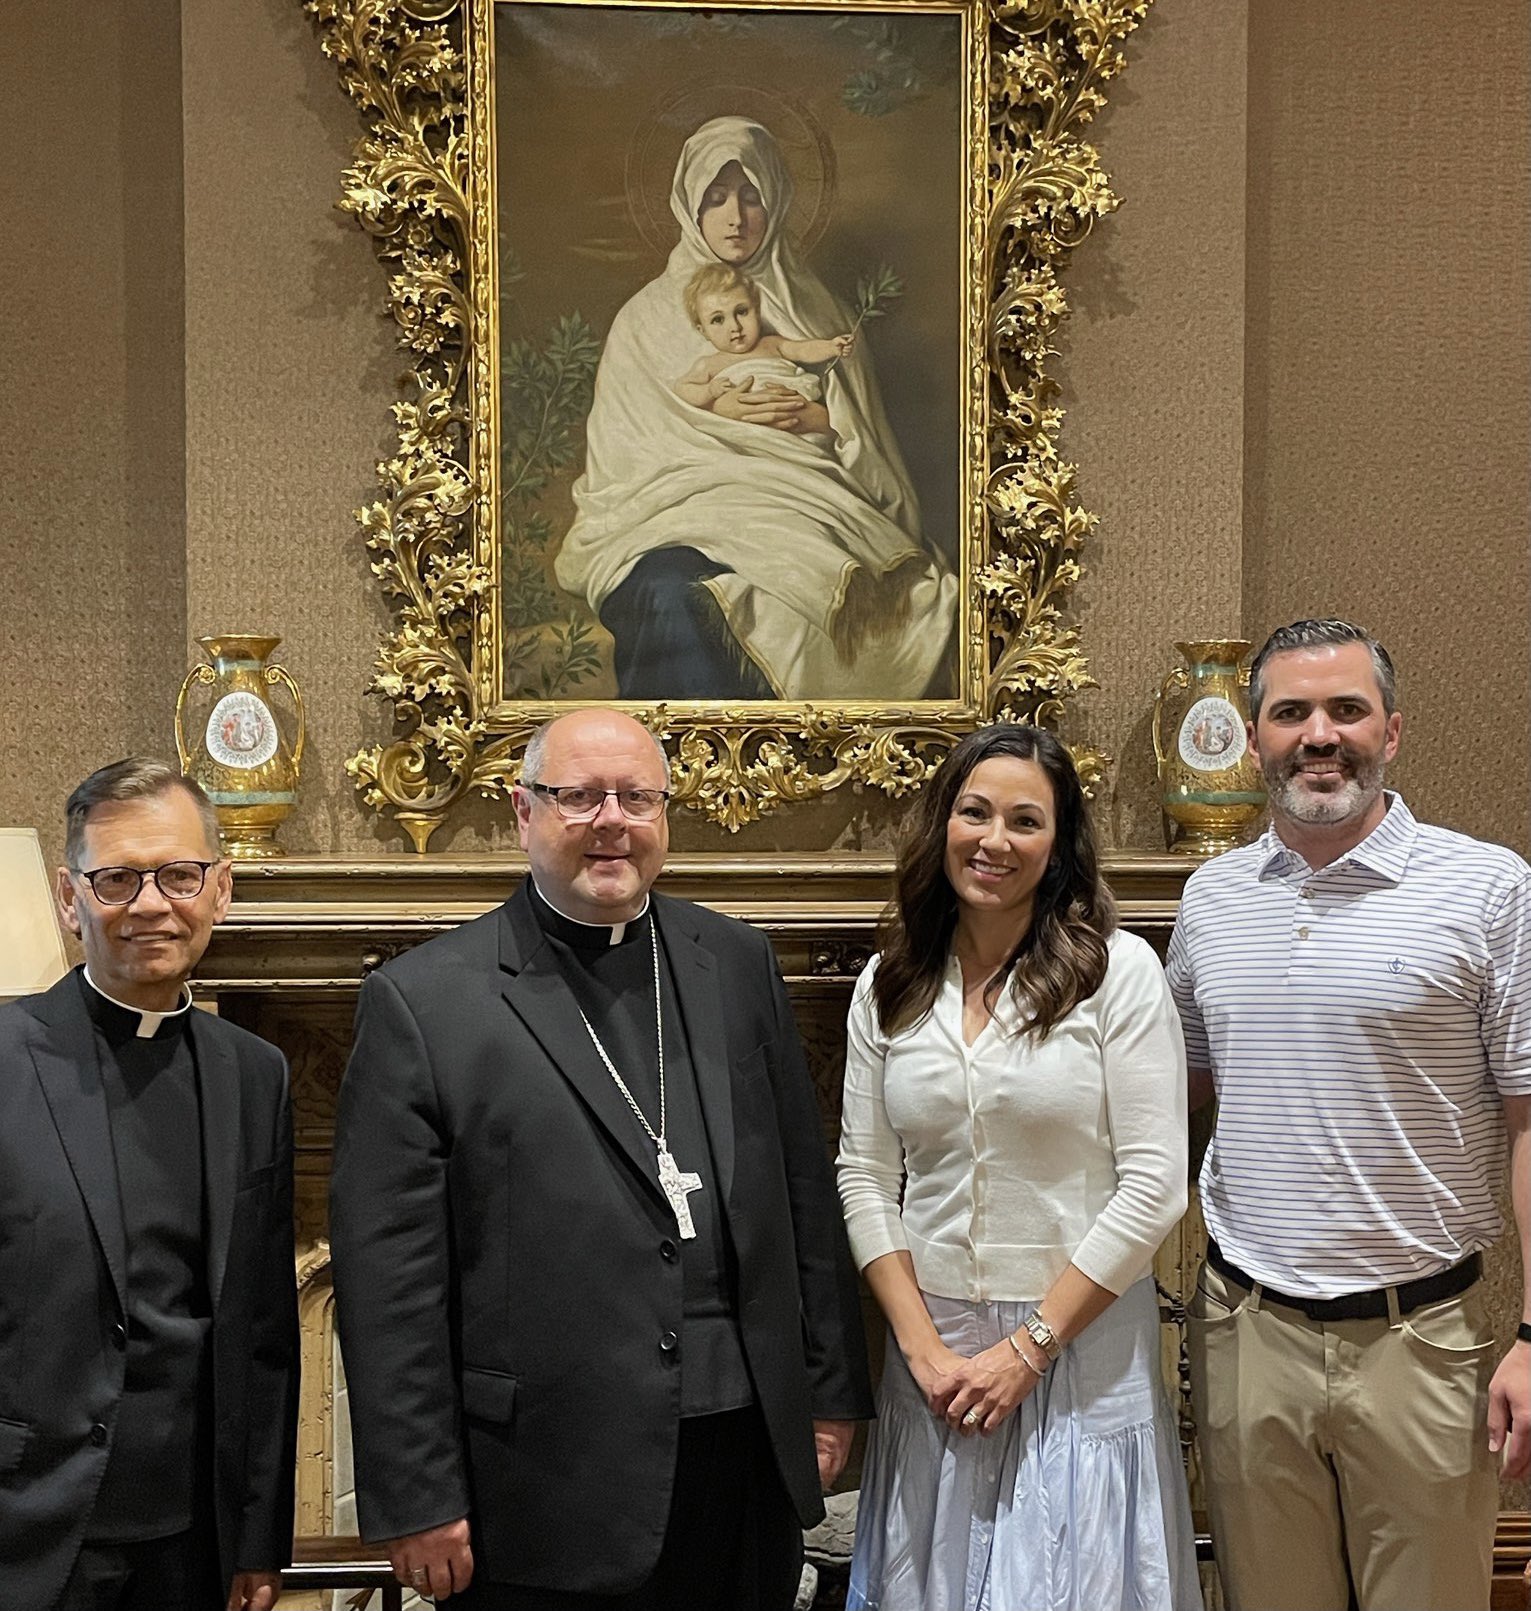 Bishop Ed Malesic On Twitter This Afternoon I Welcomed Cleveland Browns Head Coach Kevin Stefanski His Wife Michelle And Father James Roach The Team S Catholic Chaplain To The Cathedral Rectory For Lunch